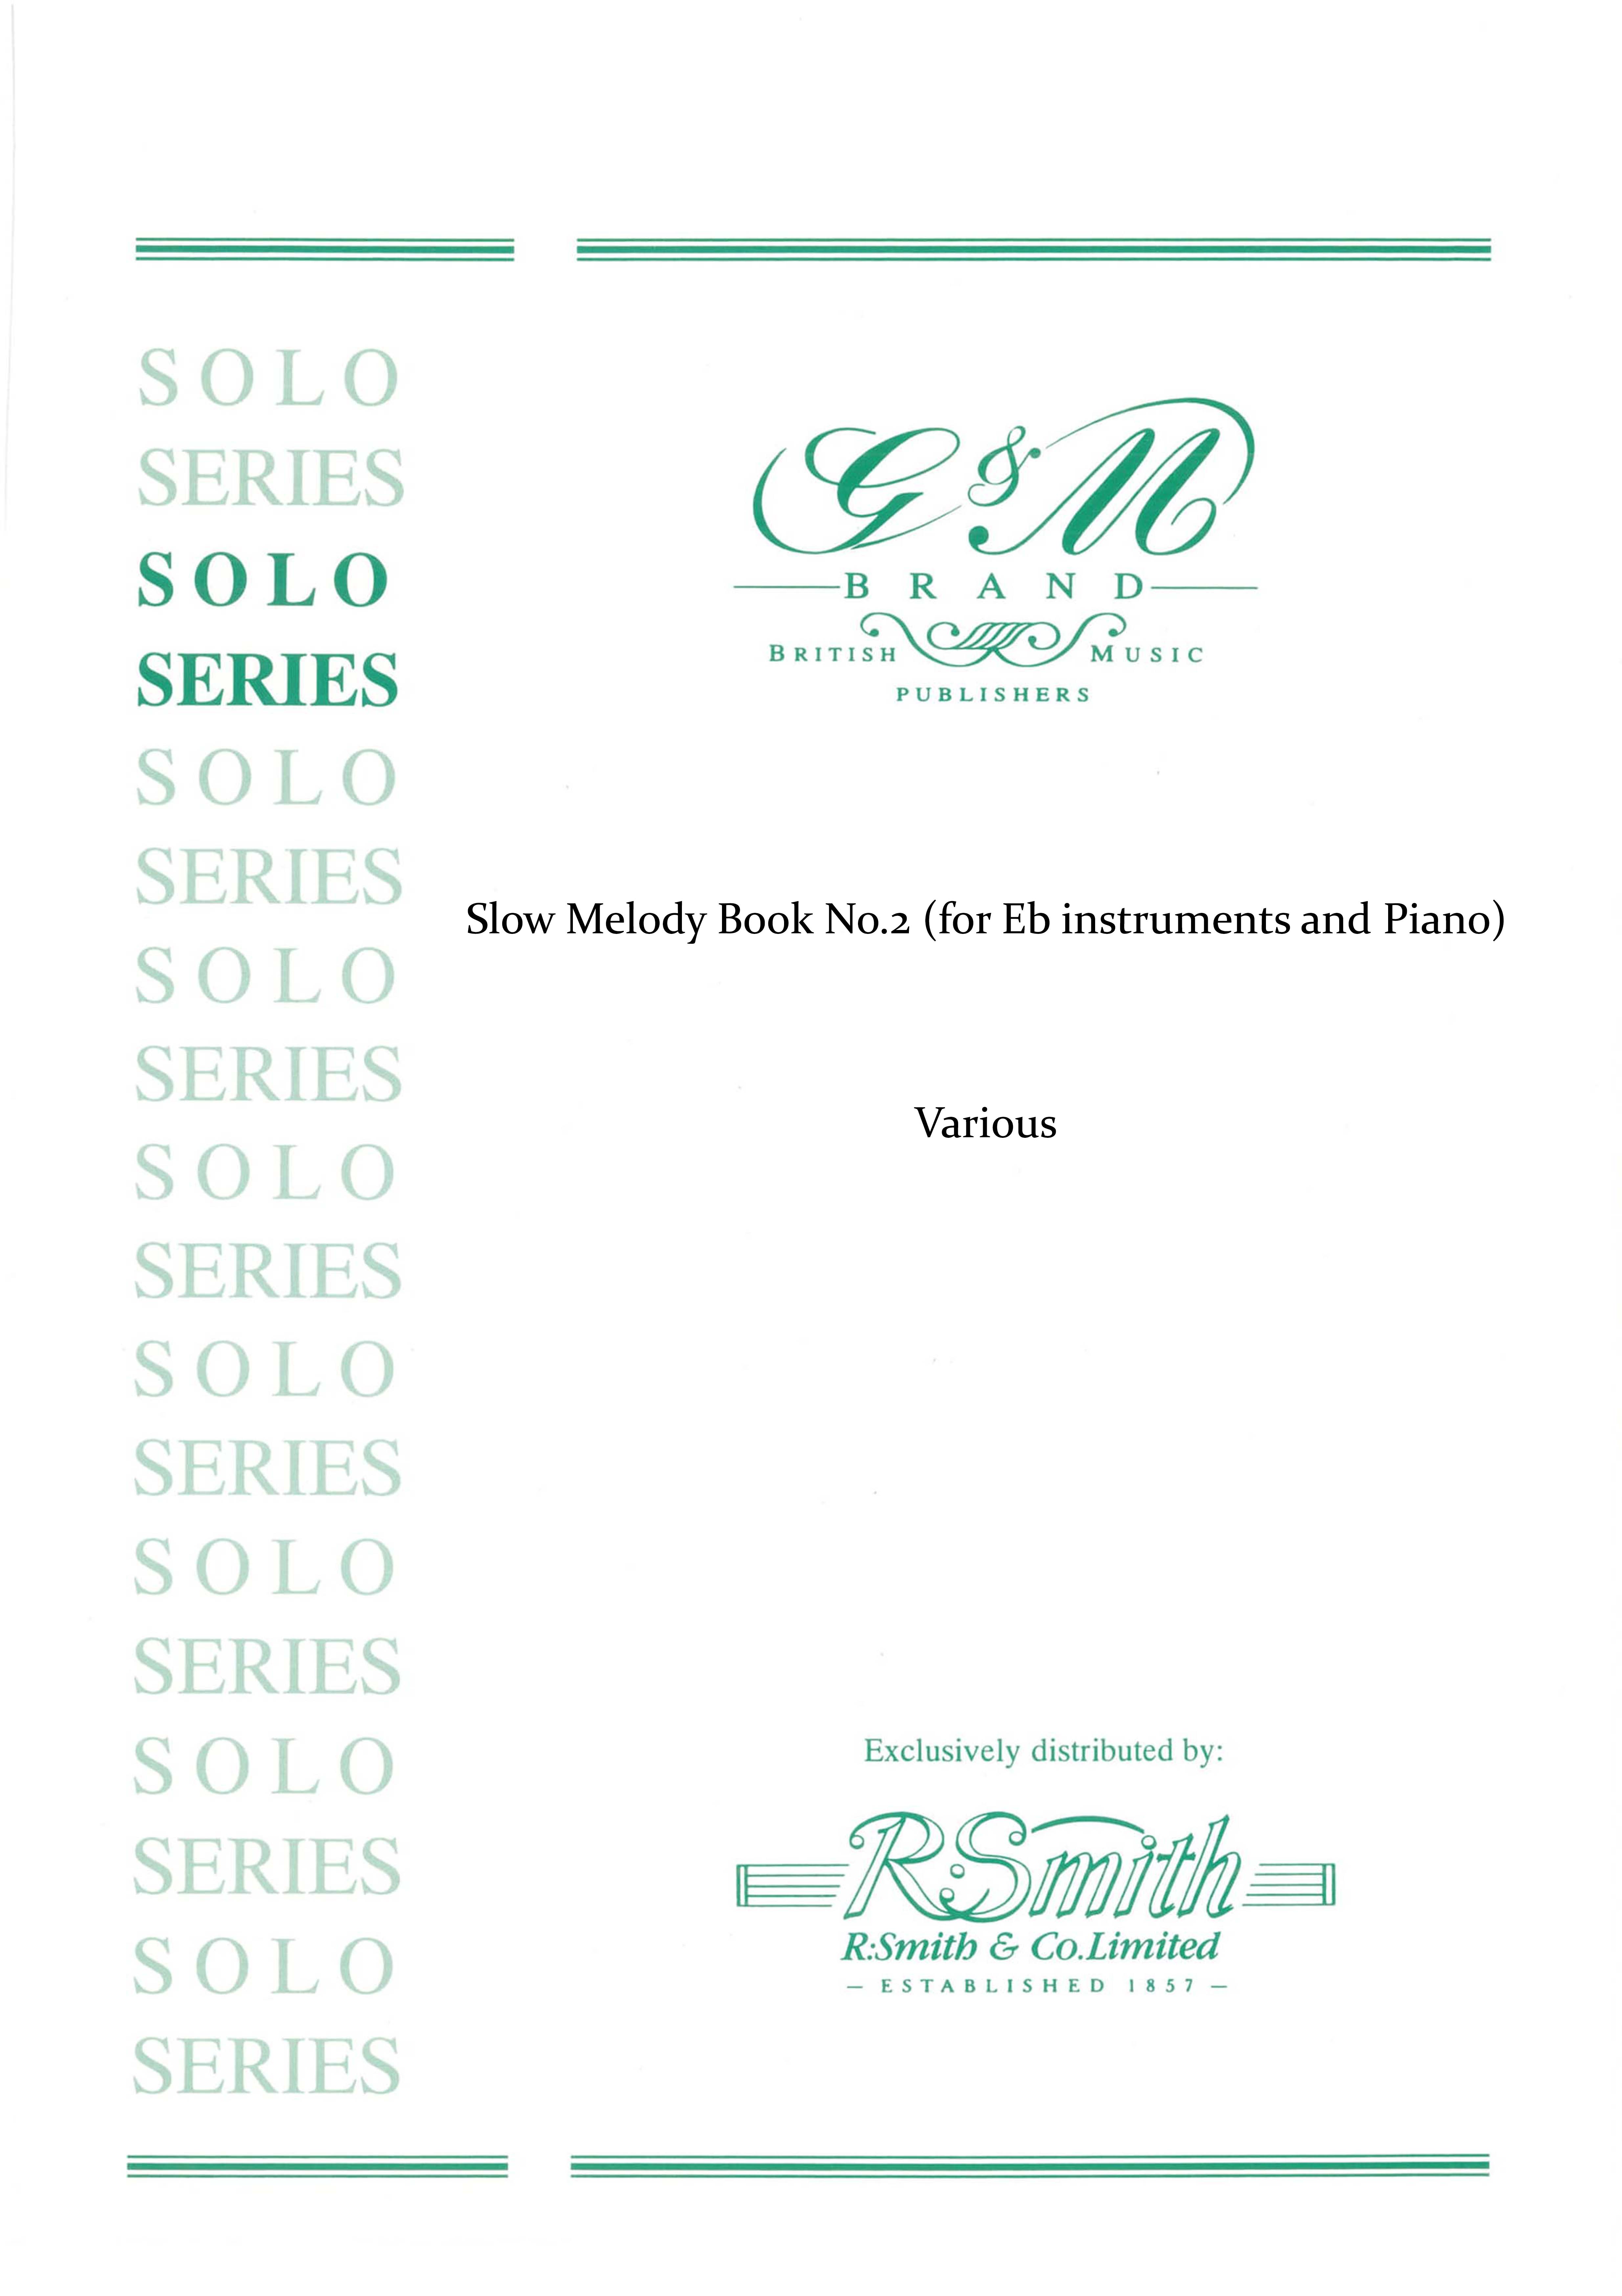 Slow Melody Book No. 2 (for Eb Instruments and Piano)